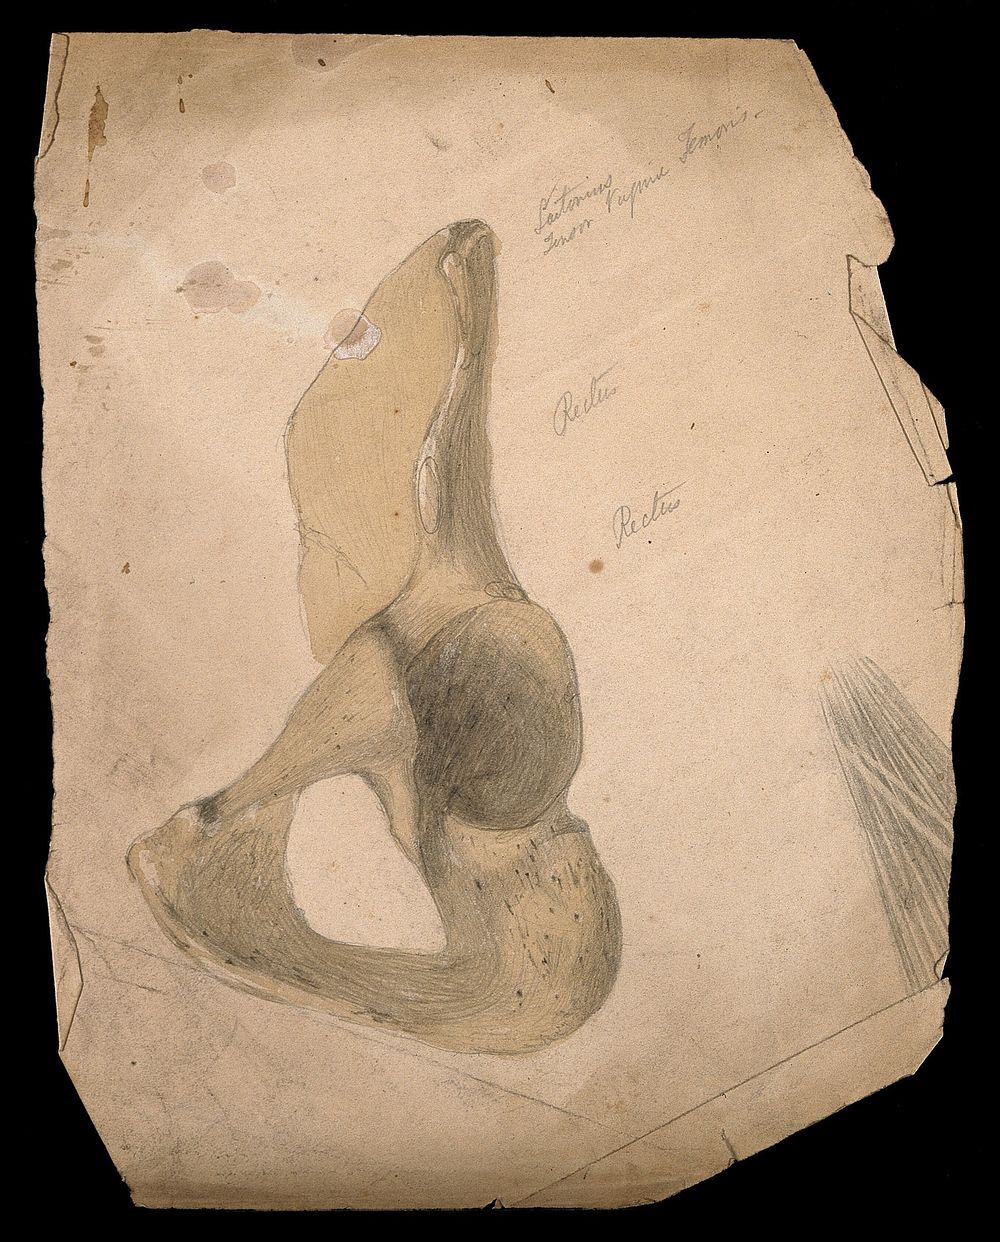 Part of the pelvis: the hip bone. Pencil and watercolour drawing by J.C. Whishaw, 1852/1854.